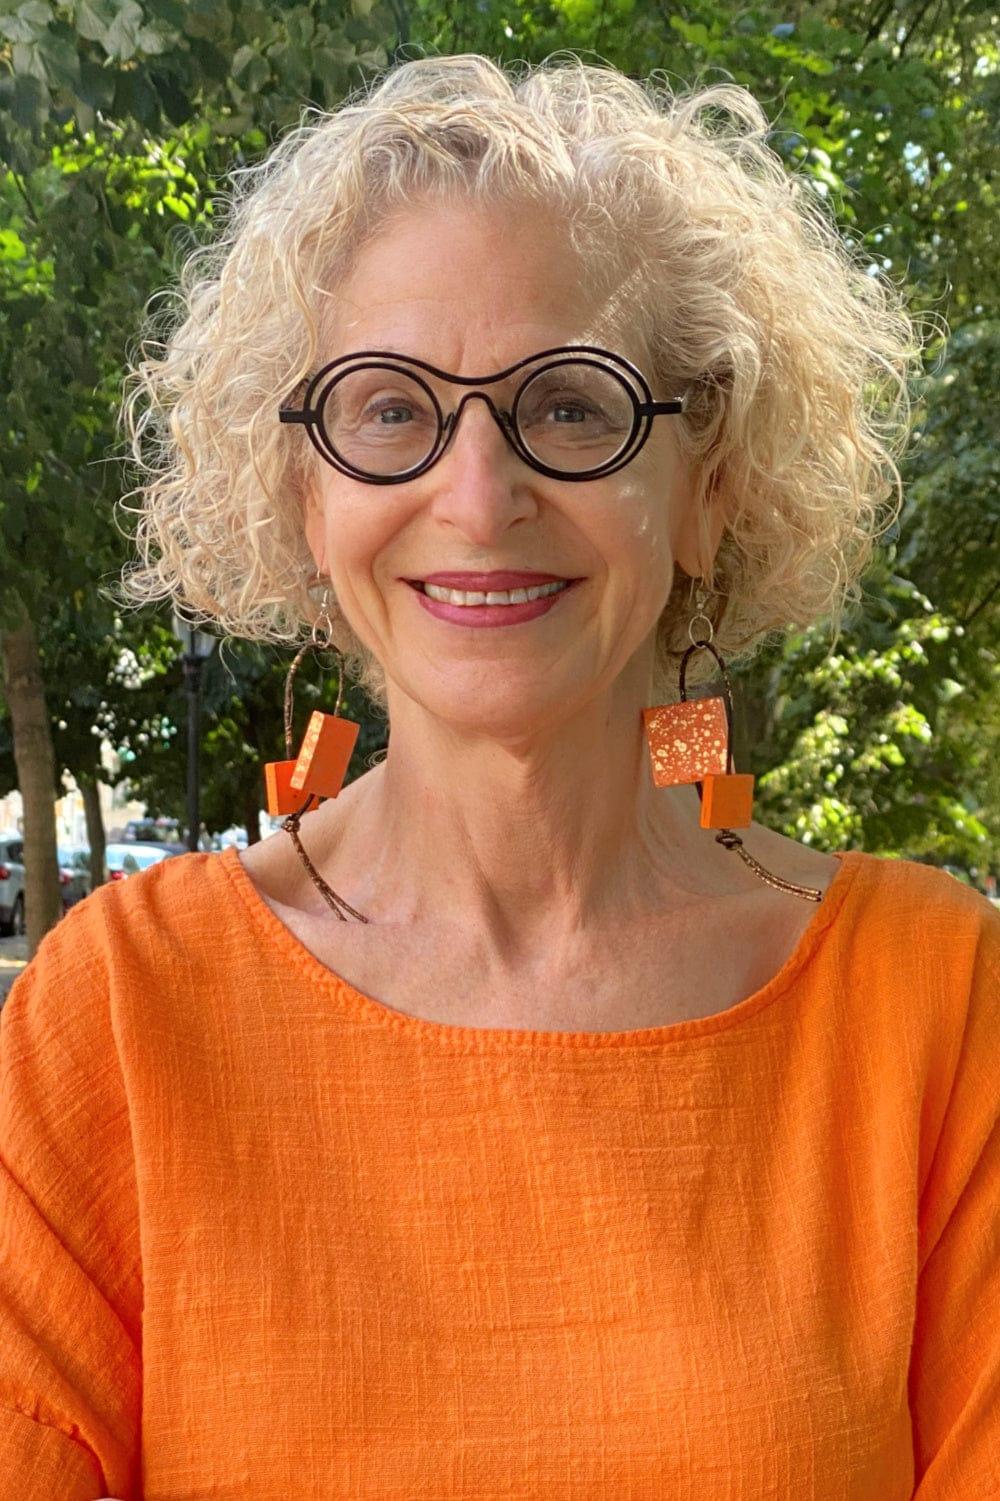 Smiling older woman wearing fun black rim glasses and orange dangle wooden earrings with an orang linen top.